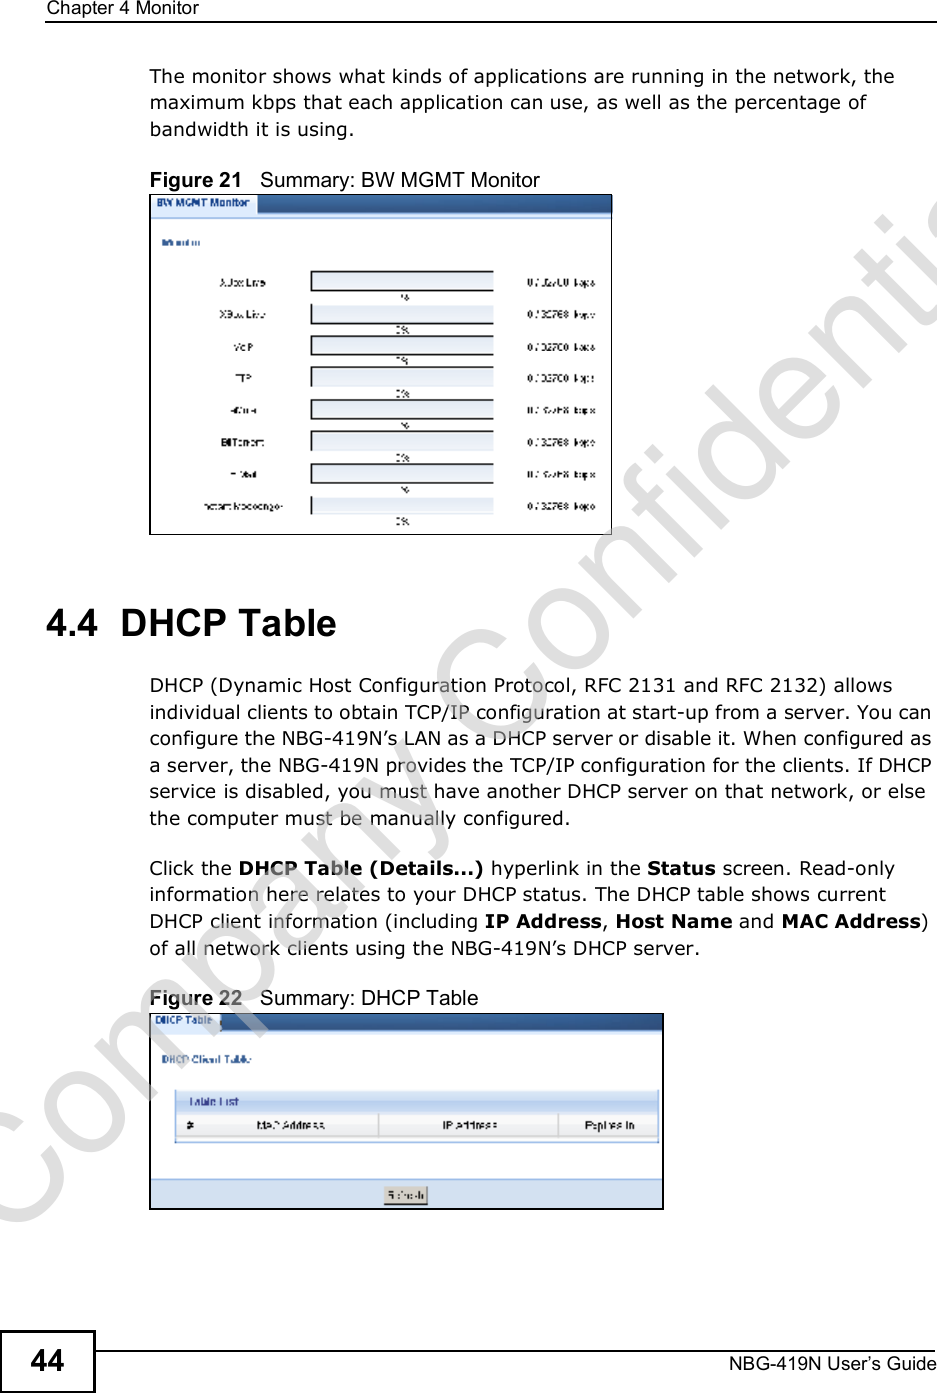 Chapter 4MonitorNBG-419N User s Guide44The monitor shows what kinds of applications are running in the network, the maximum kbps that each application can use, as well as the percentage of bandwidth it is using. Figure 21   Summary: BW MGMT Monitor4.4  DHCP Table    DHCP (Dynamic Host Configuration Protocol, RFC 2131 and RFC 2132) allows individual clients to obtain TCP/IP configuration at start-up from a server. You can configure the NBG-419N!s LAN as a DHCP server or disable it. When configured as a server, the NBG-419N provides the TCP/IP configuration for the clients. If DHCP service is disabled, you must have another DHCP server on that network, or else the computer must be manually configured.Click the DHCP Table (Details...) hyperlink in the Status screen. Read-only information here relates to your DHCP status. The DHCP table shows current DHCP client information (including IP Address, Host Name and MAC Address) of all network clients using the NBG-419N!s DHCP server.Figure 22   Summary: DHCP TableCompany Confidential